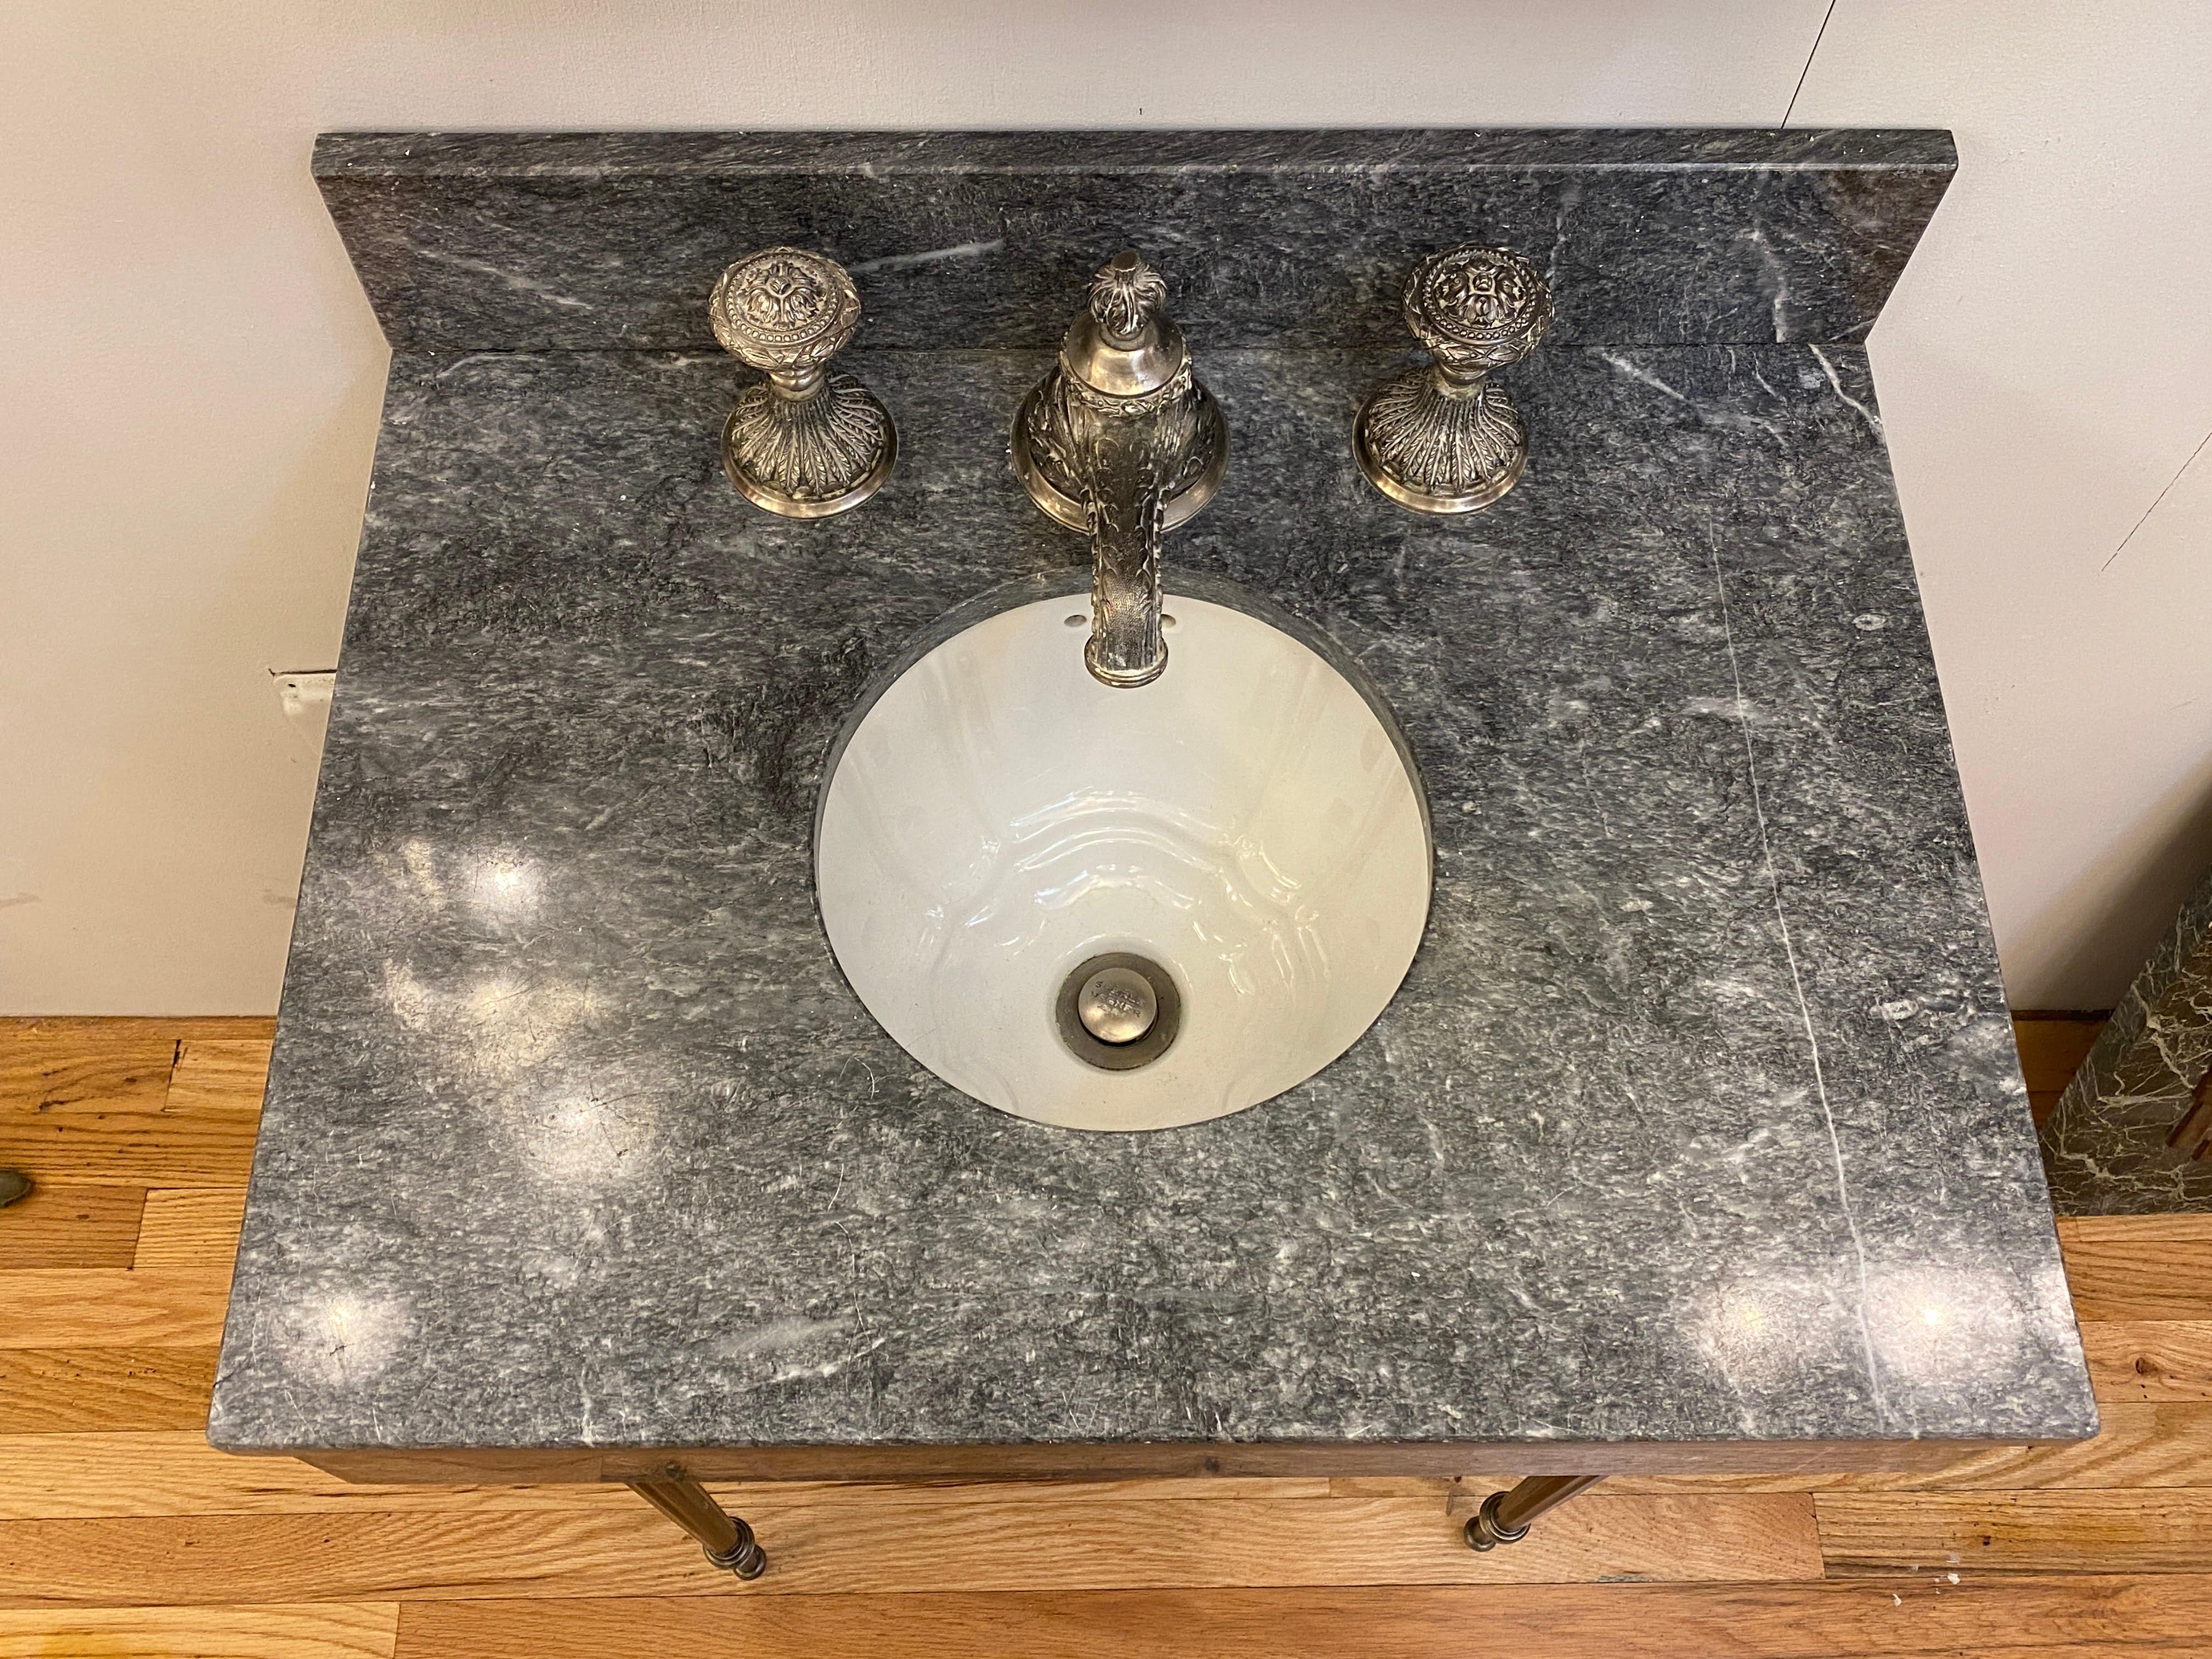 1990s petite gray marble console sink by Sherle Wagner. Showing a scalloped white ceramic sink basin and reeded style legs. Also has their Louis Petite knob faucet set in pewter. From a Park Ave apartment in Manhattan. This can be seen at our 333